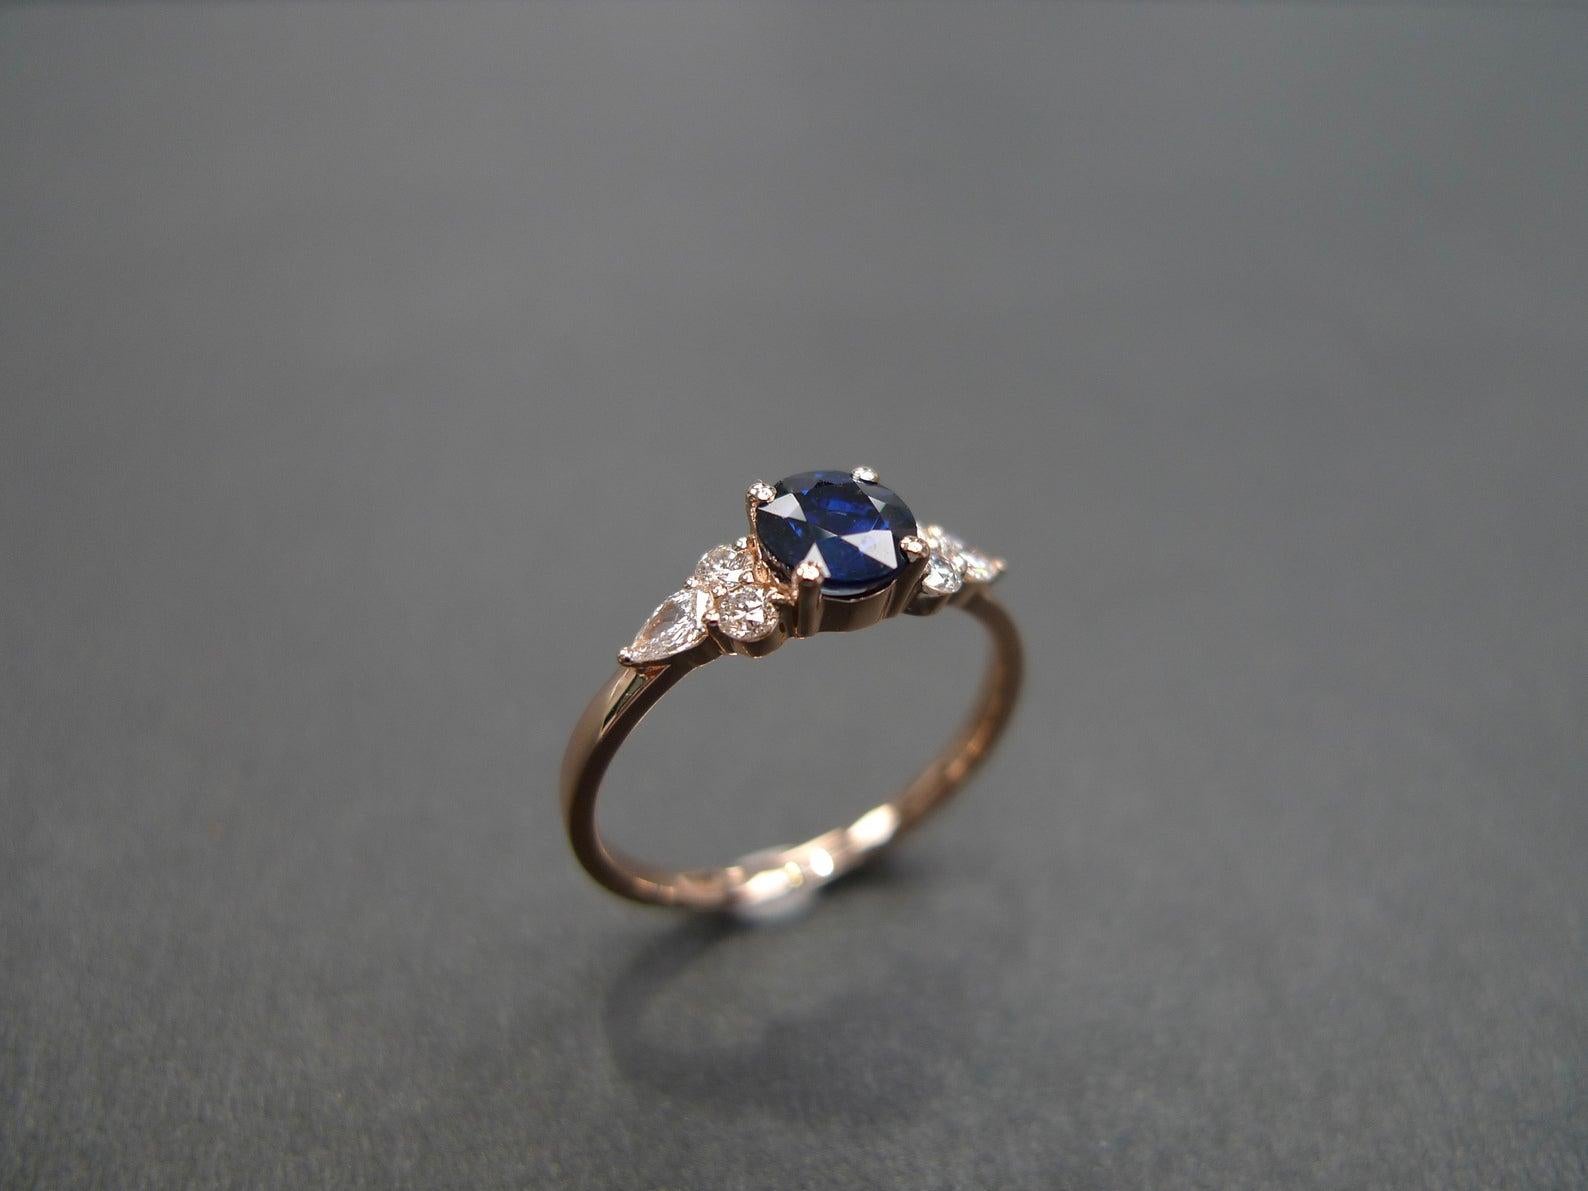 For Sale:  Blue Sapphire and Diamond Unique Engagement Ring in 14K Rose Gold, gift for her 2